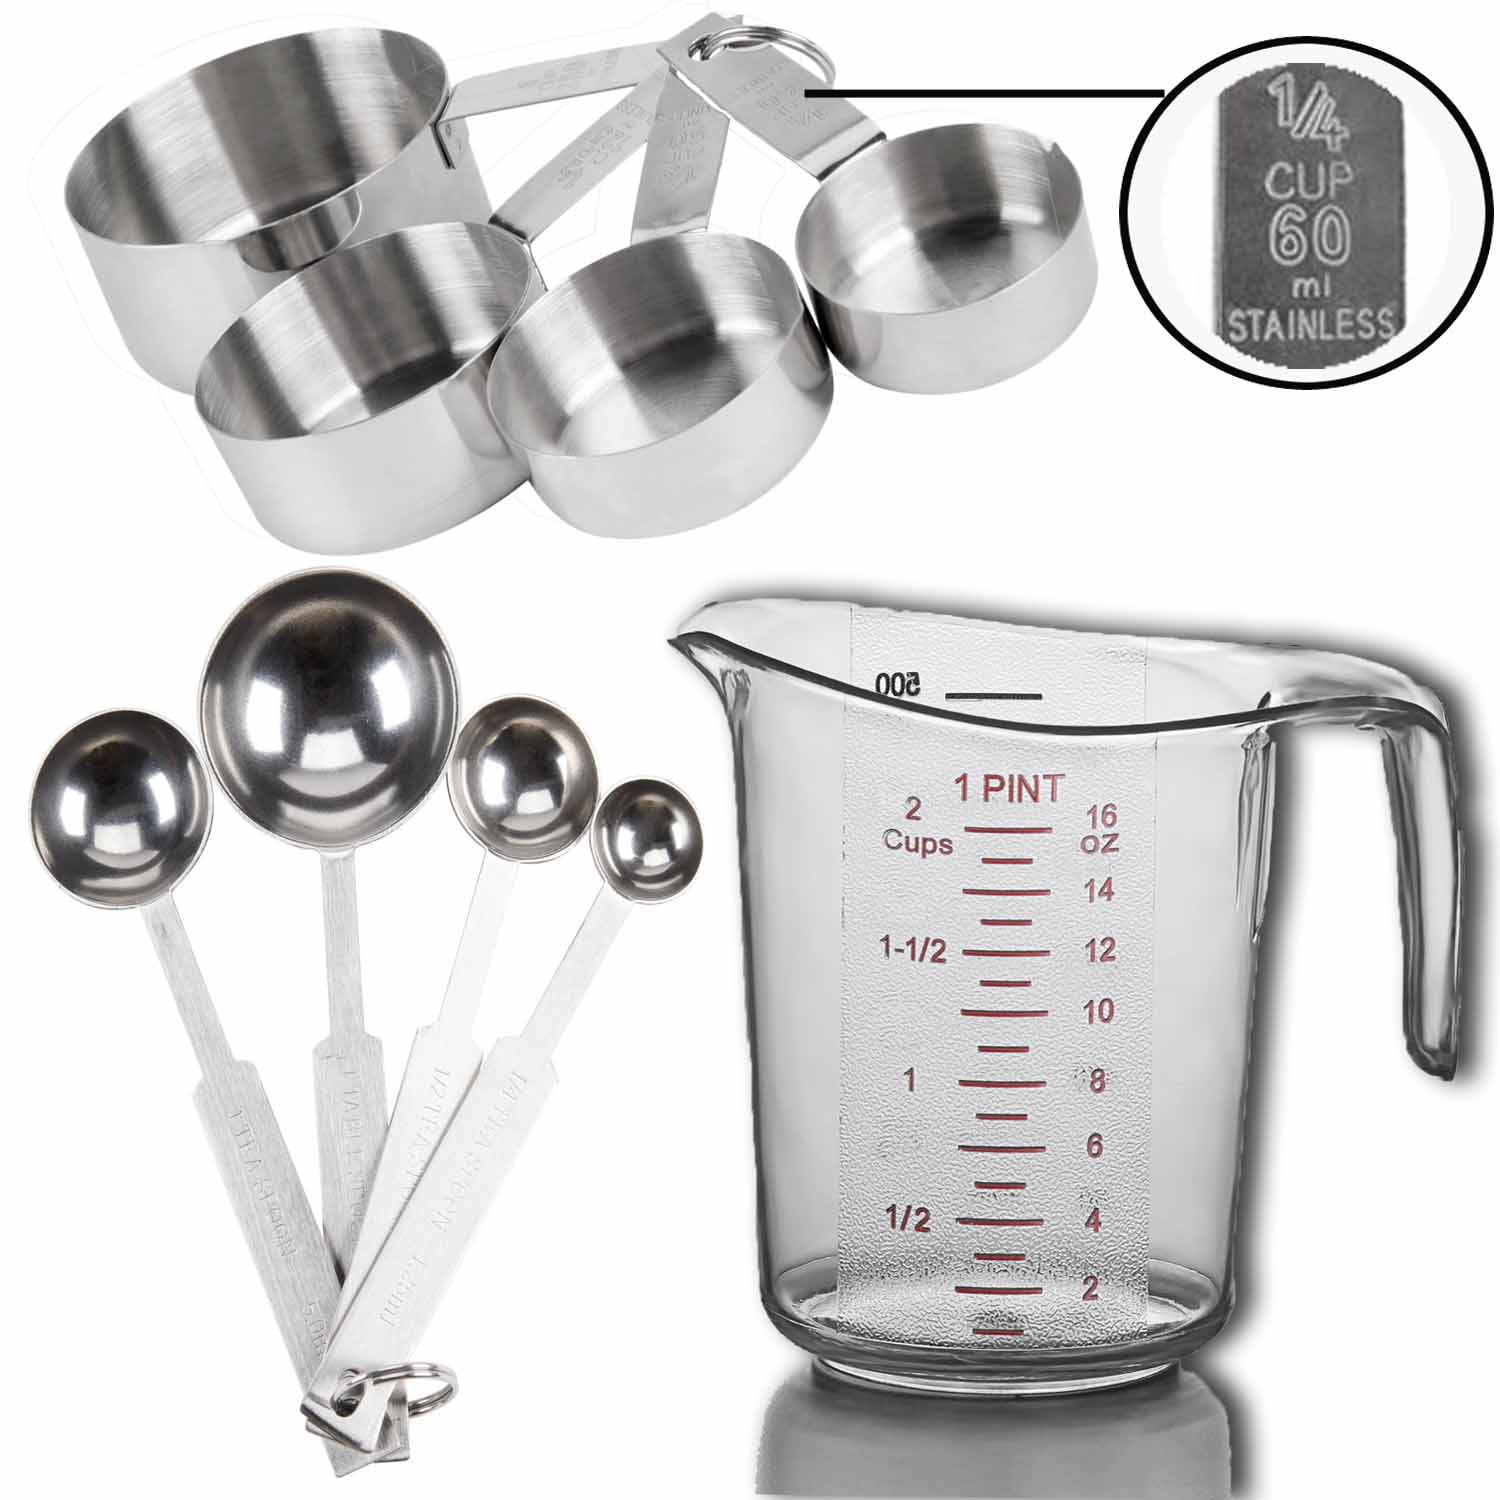 Shxx Plastic Measuring Cups And Spoons Set - Measuring Cups Spoons Set Bpa  Free Nesting Measure Cups Set, Engraved Metric/us Markings Measure Spoon To